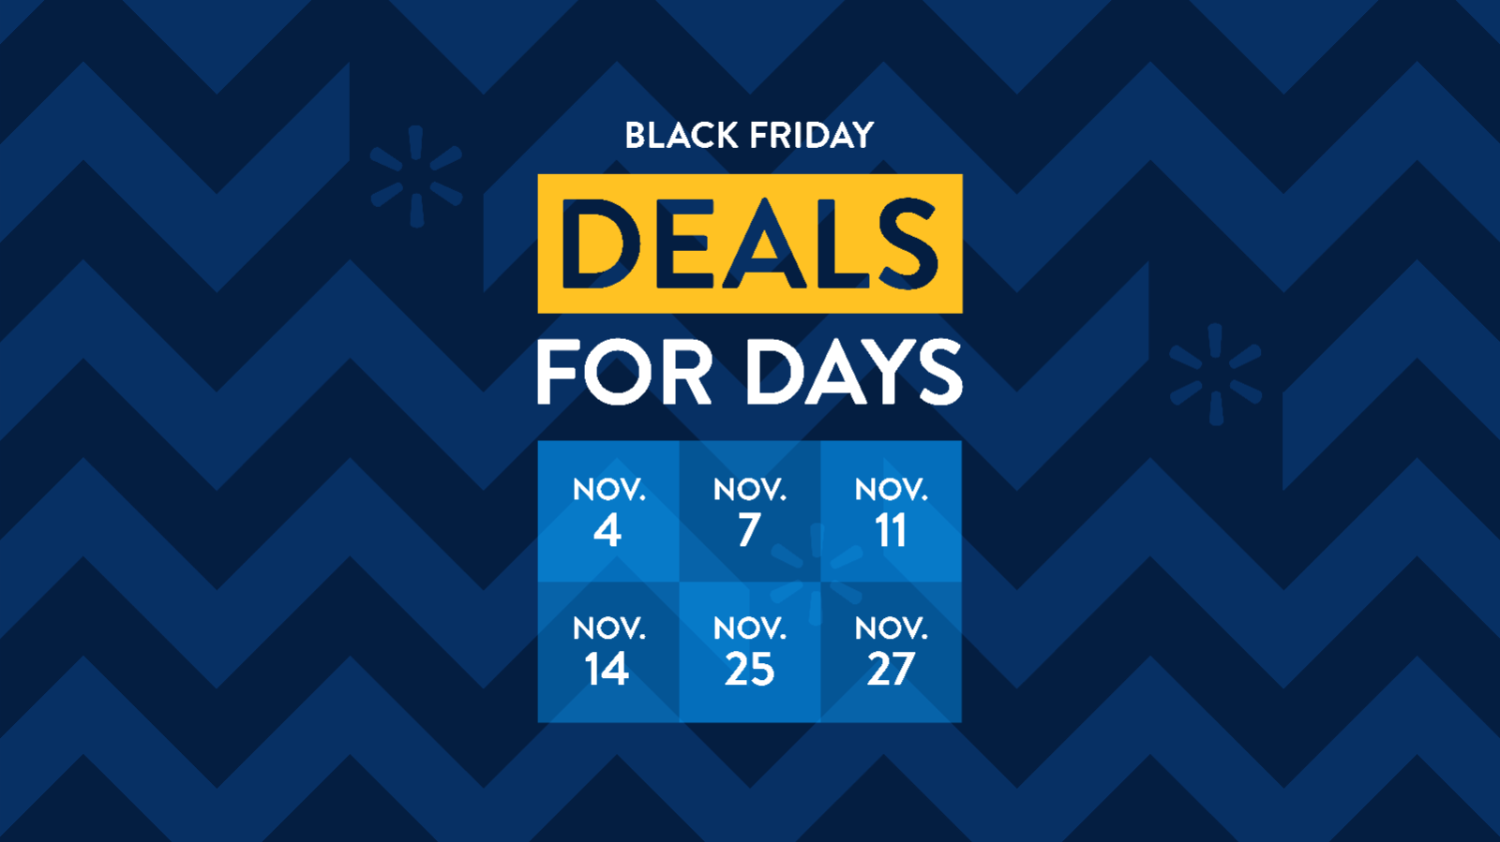 Walmart is ready to deliver 'Black Friday Deals for Days' - RetailWire